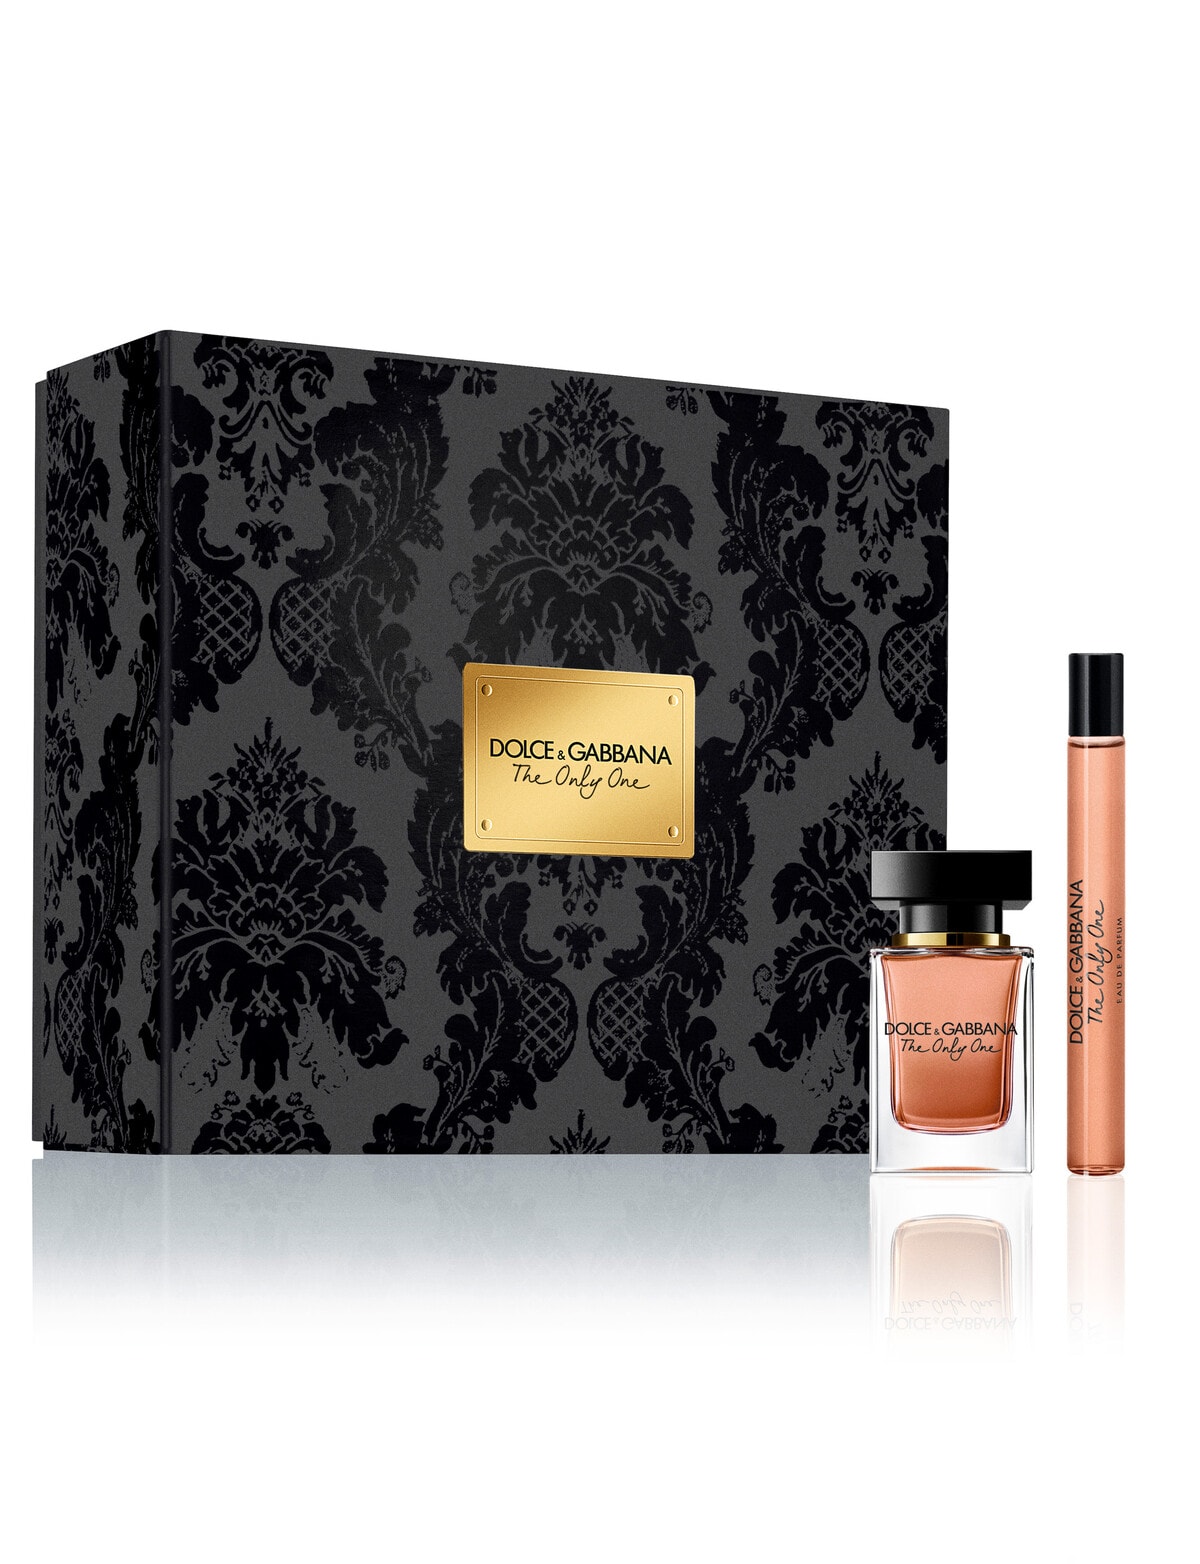 Dolce & Gabbana The Only One EDP Gift Set - Gift Sets